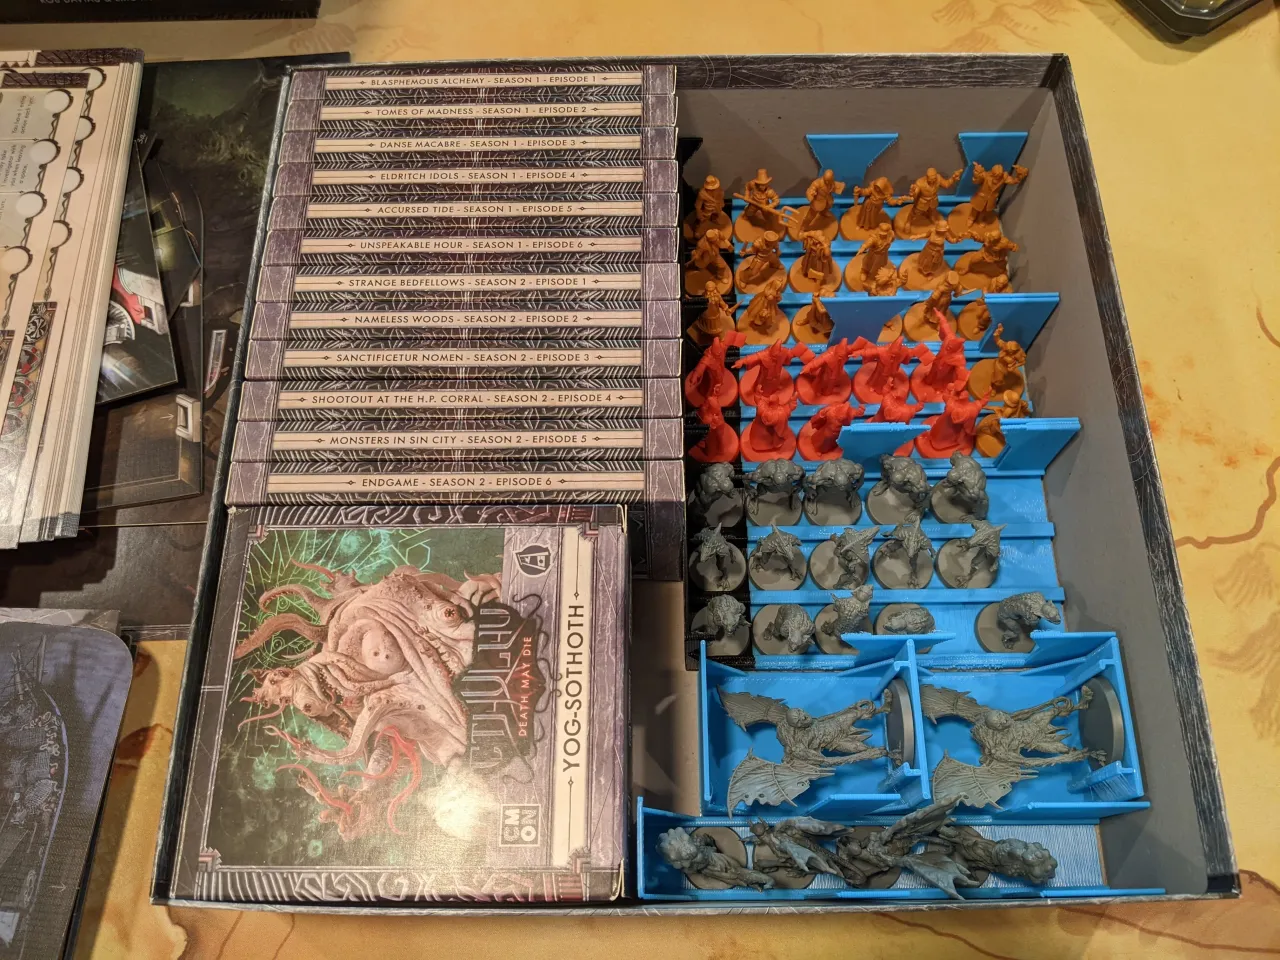 REMIX Cthulhu Death May Die - Retail Boxes Inserts SLEEVED CARDS (holds  Season 1, 2, Goat, Yog) by gameyspirits, Download free STL model